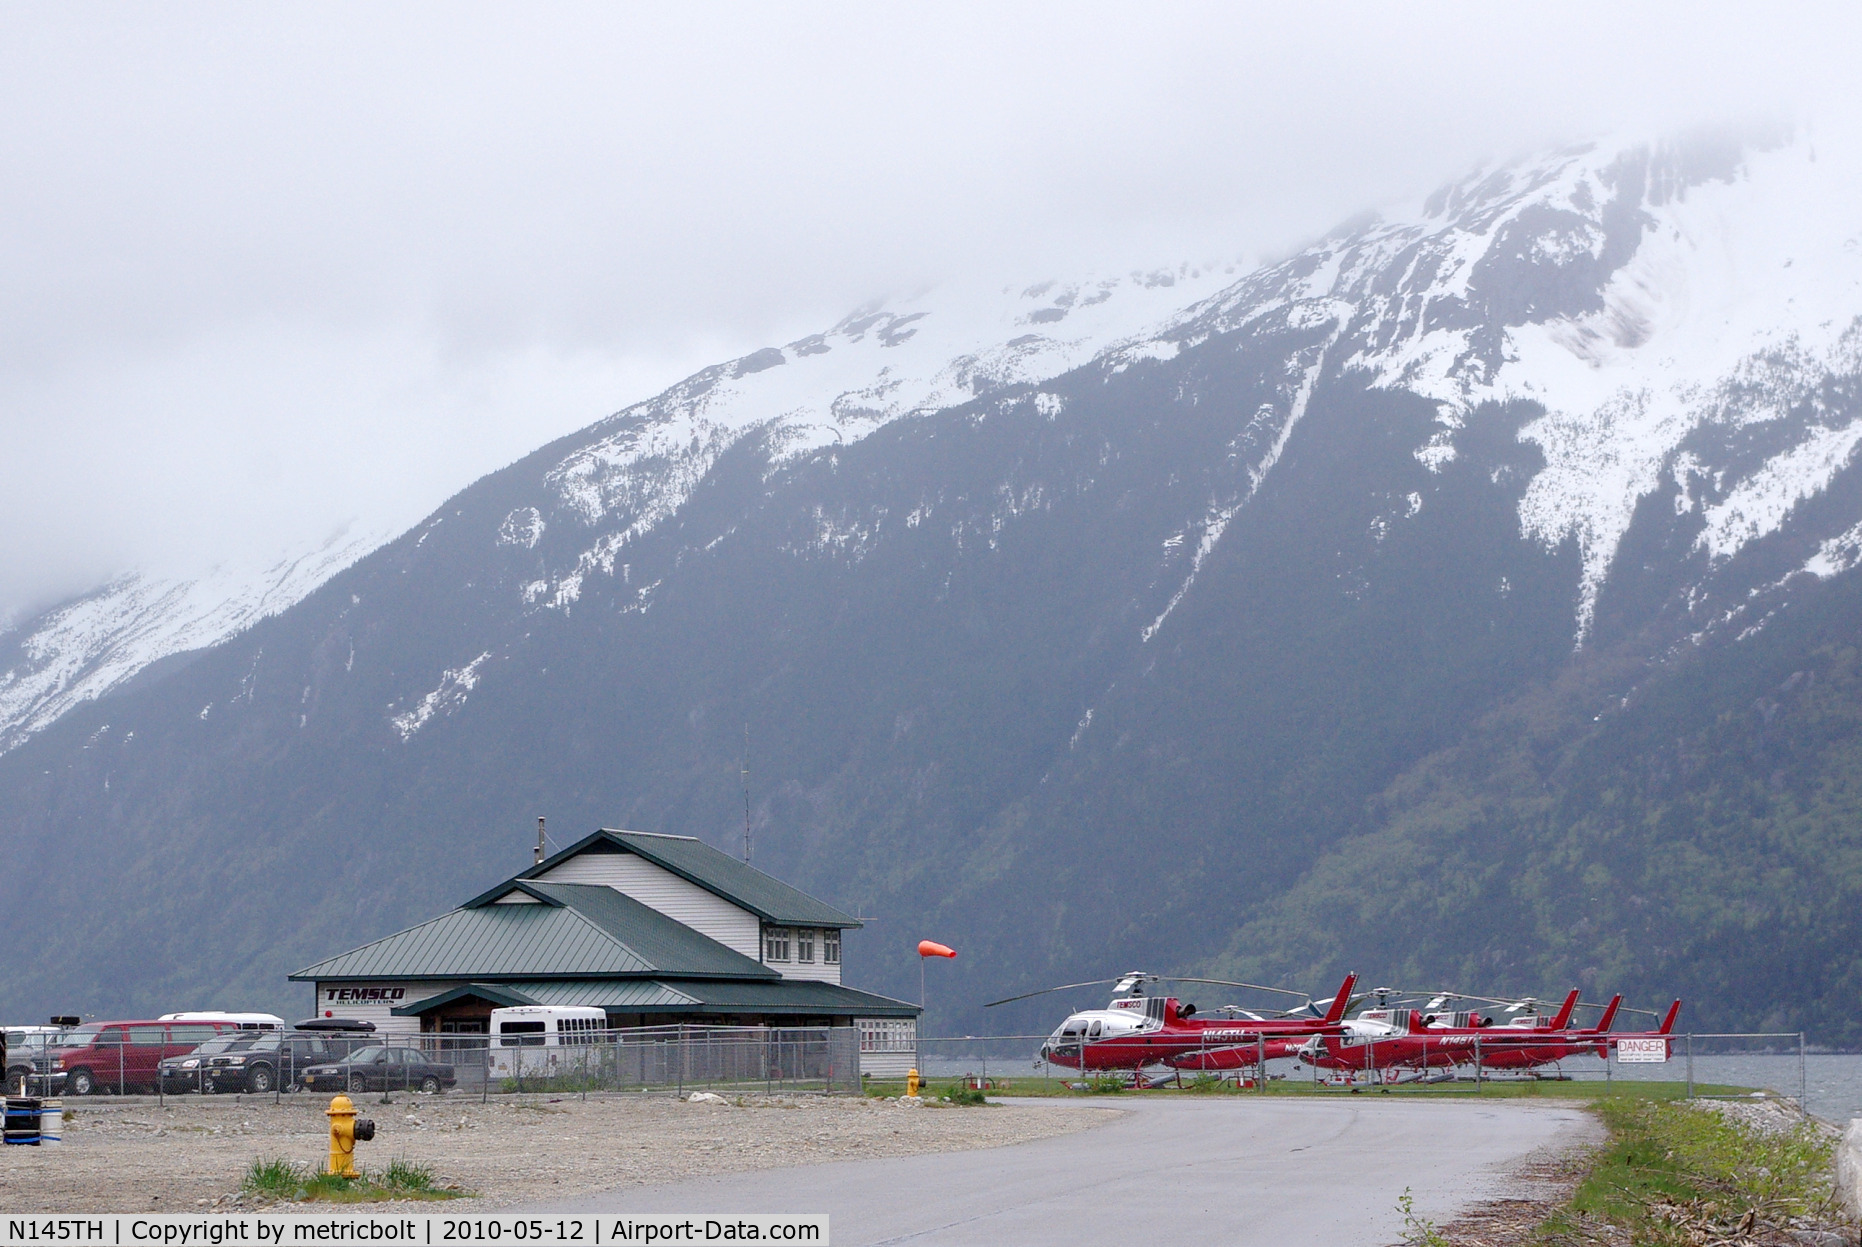 N145TH, 2003 Eurocopter AS-350B-2 Ecureuil Ecureuil C/N 9060, with other Temsco helicopters at Skagway